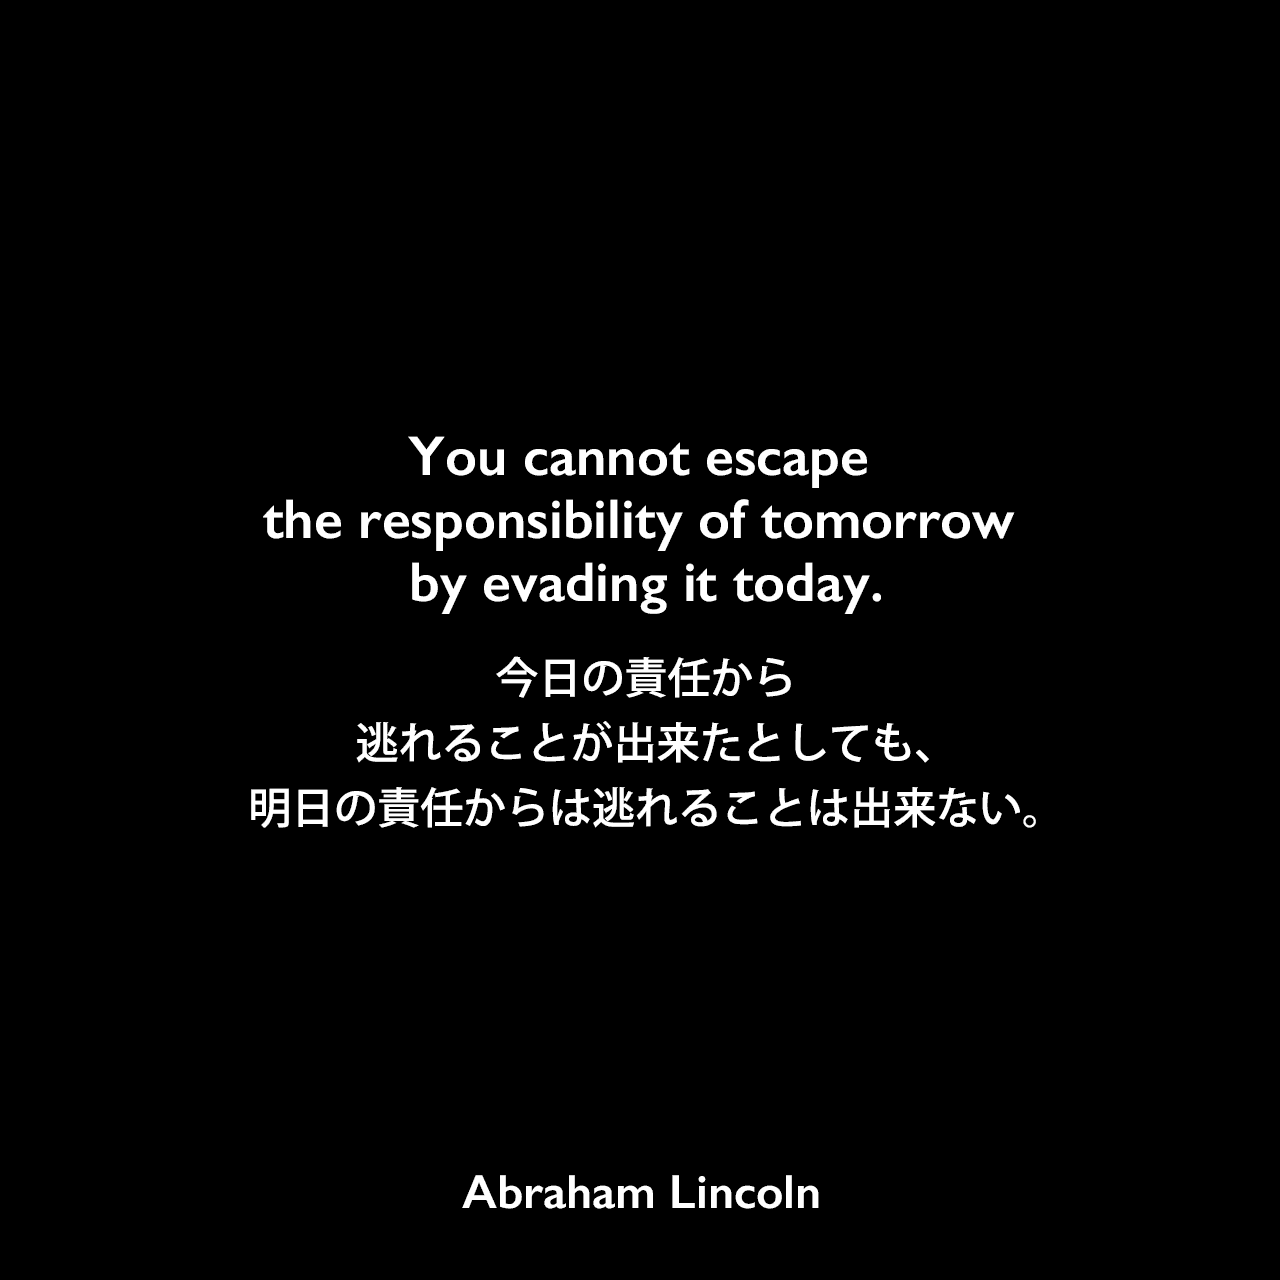 You cannot escape the responsibility of tomorrow by evading it today.今日の責任から逃れることが出来たとしても、明日の責任からは逃れることは出来ない。Abraham Lincoln